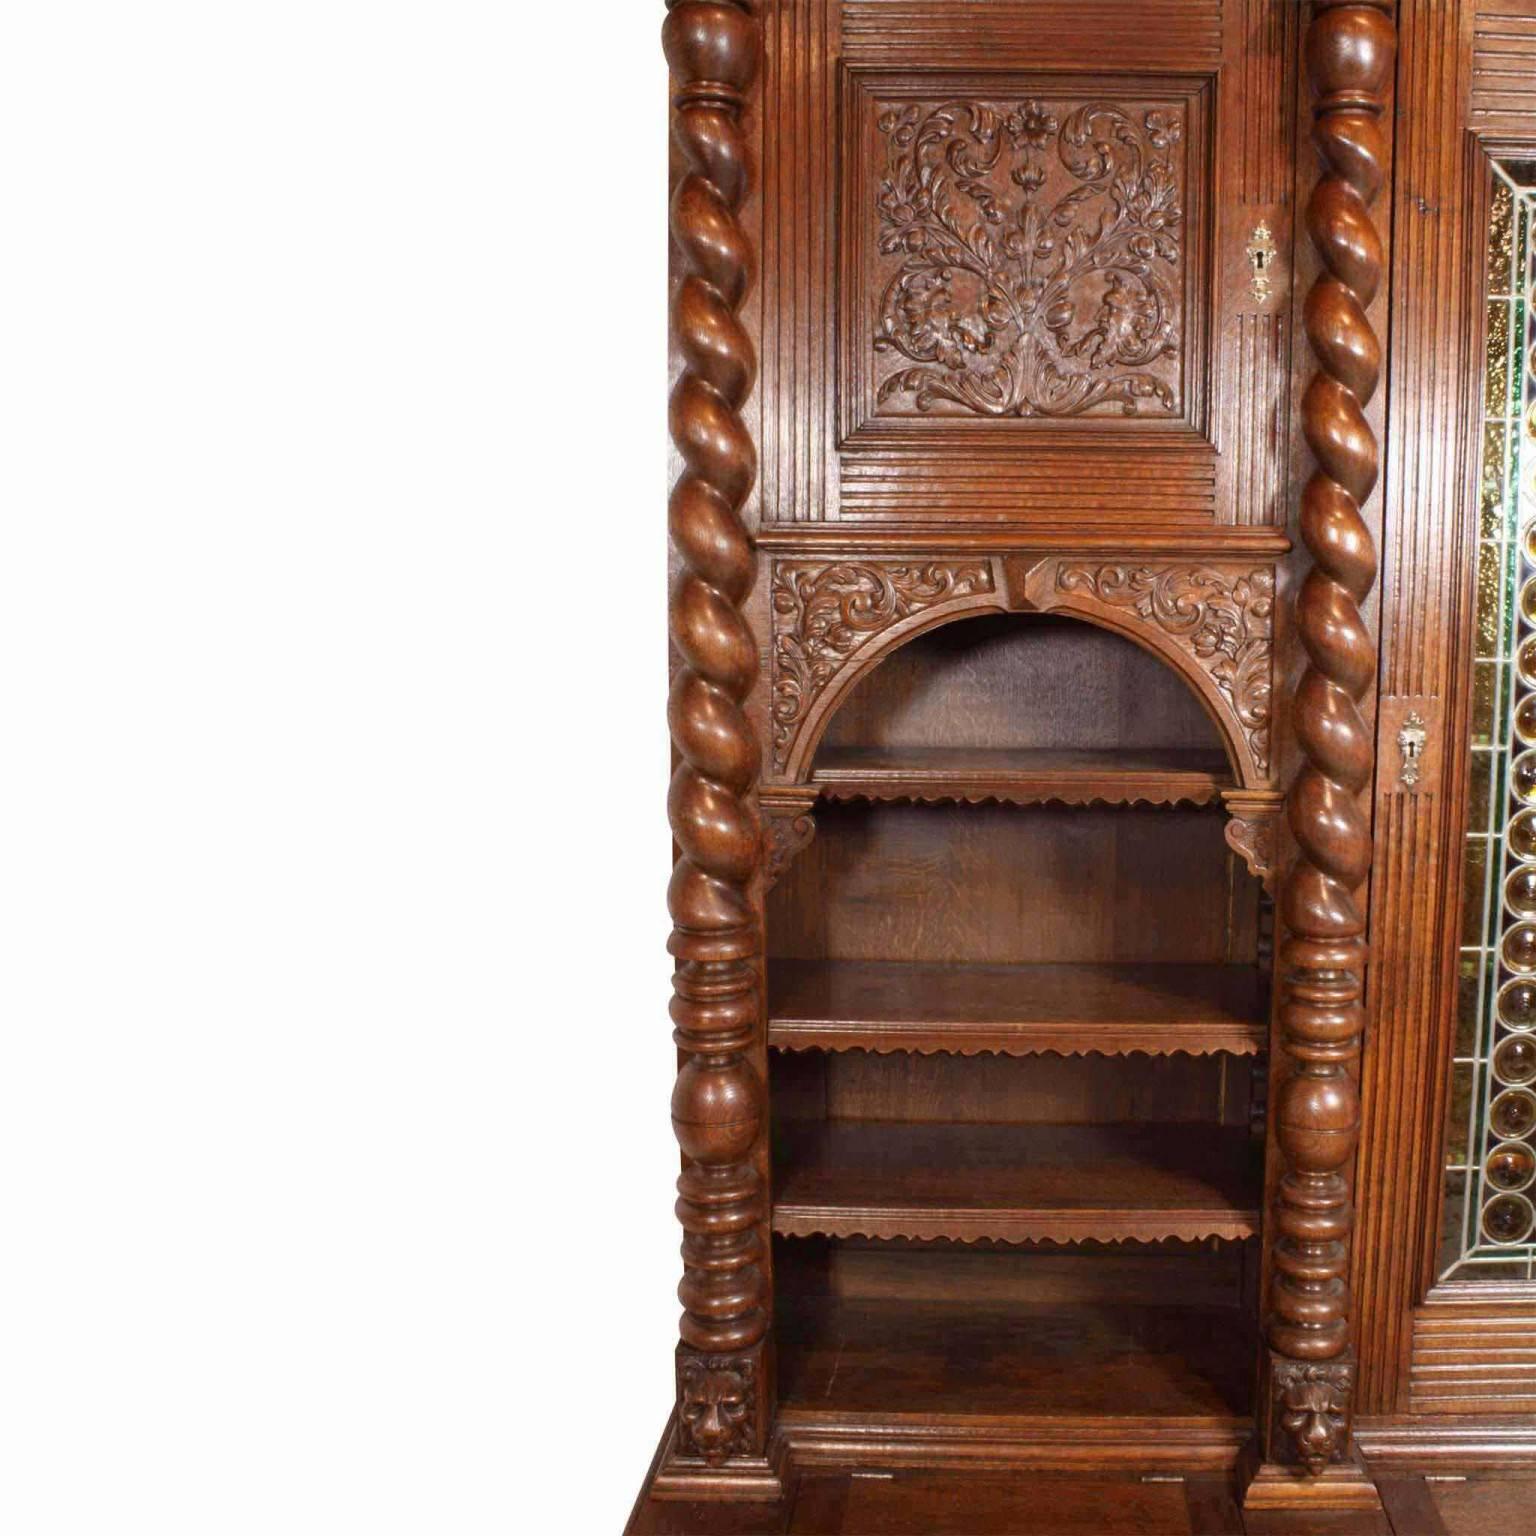 Renaissance Revival Early 20th Century Renaissance Style Bookcase with Leaded Glass Door